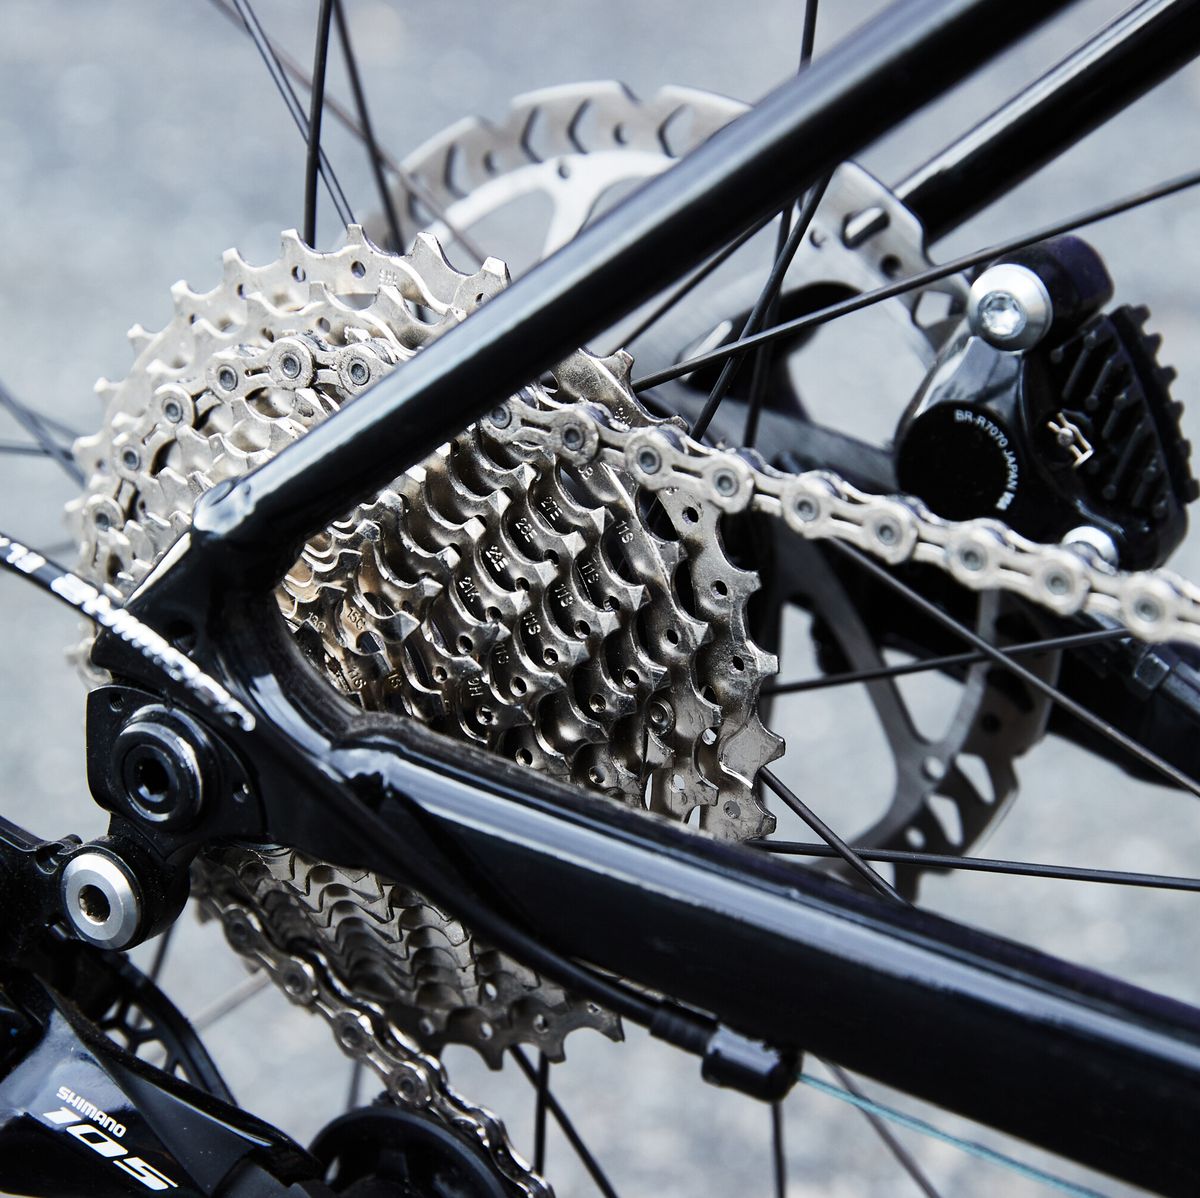 How to Shift for Beginners: When to Shift Gears on a Bike